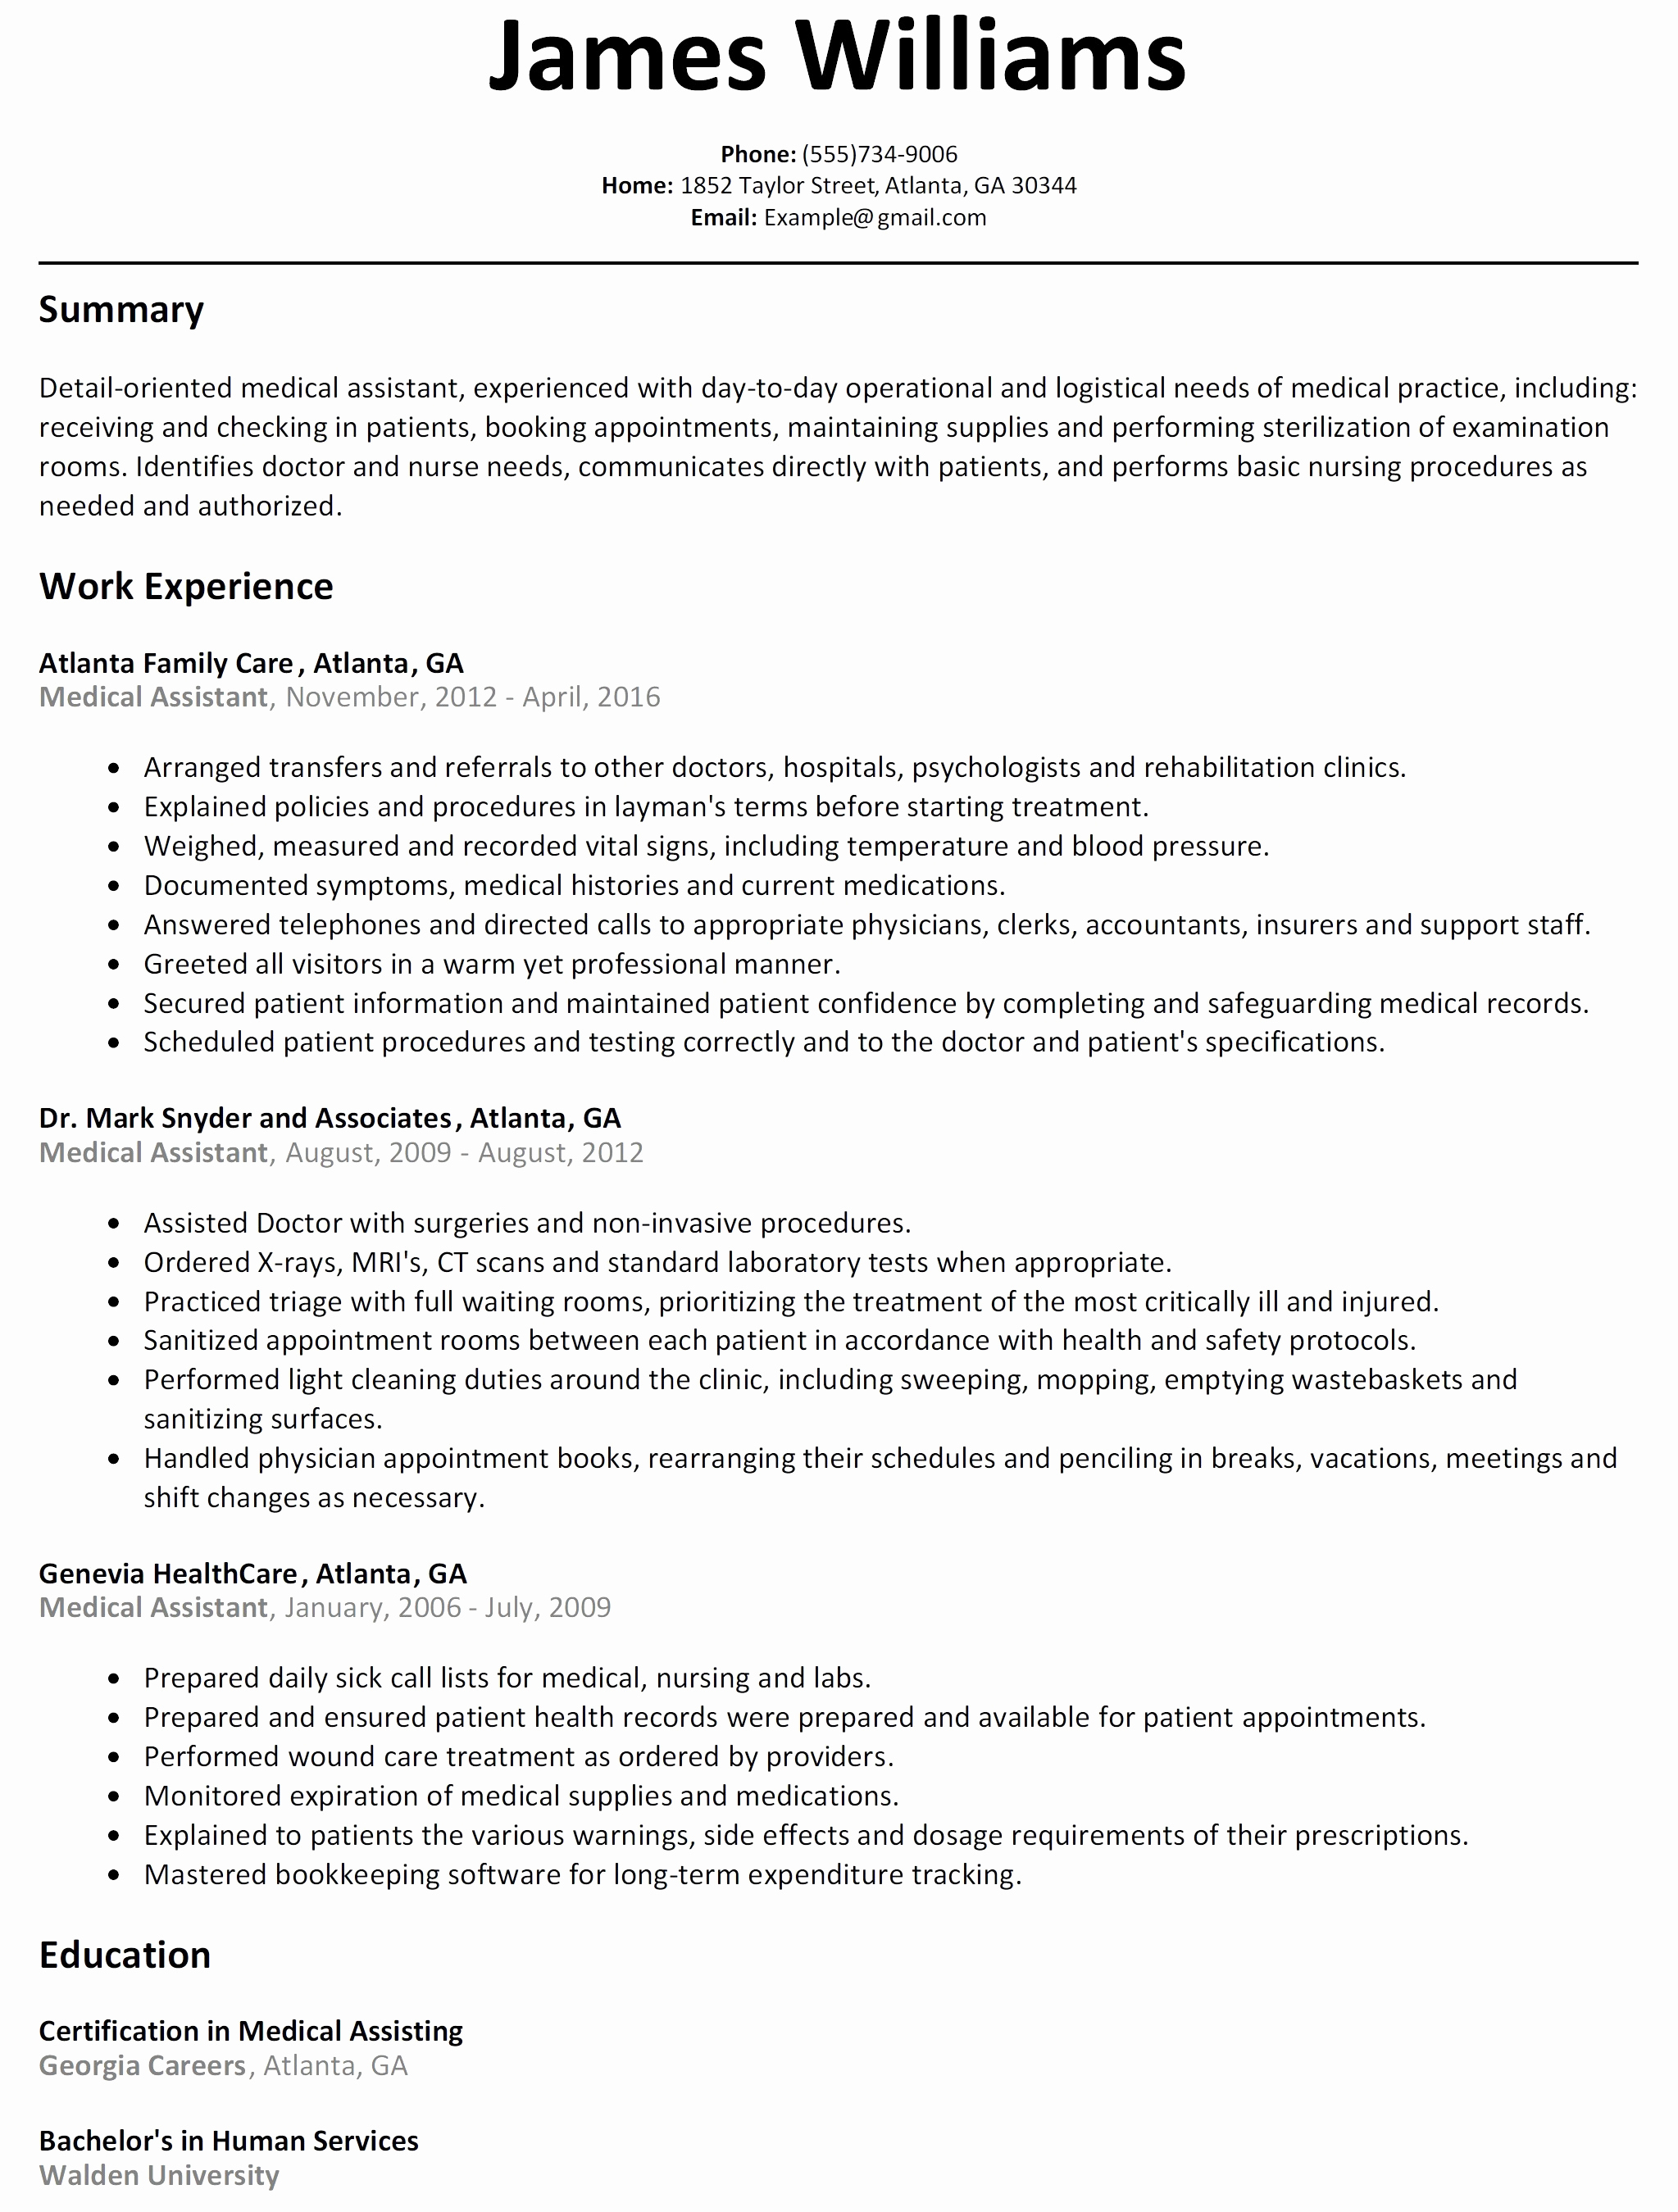 Cover Letter Word Template Free - Cover Letter Sample Awesome Free Resume Examples Unique Resume